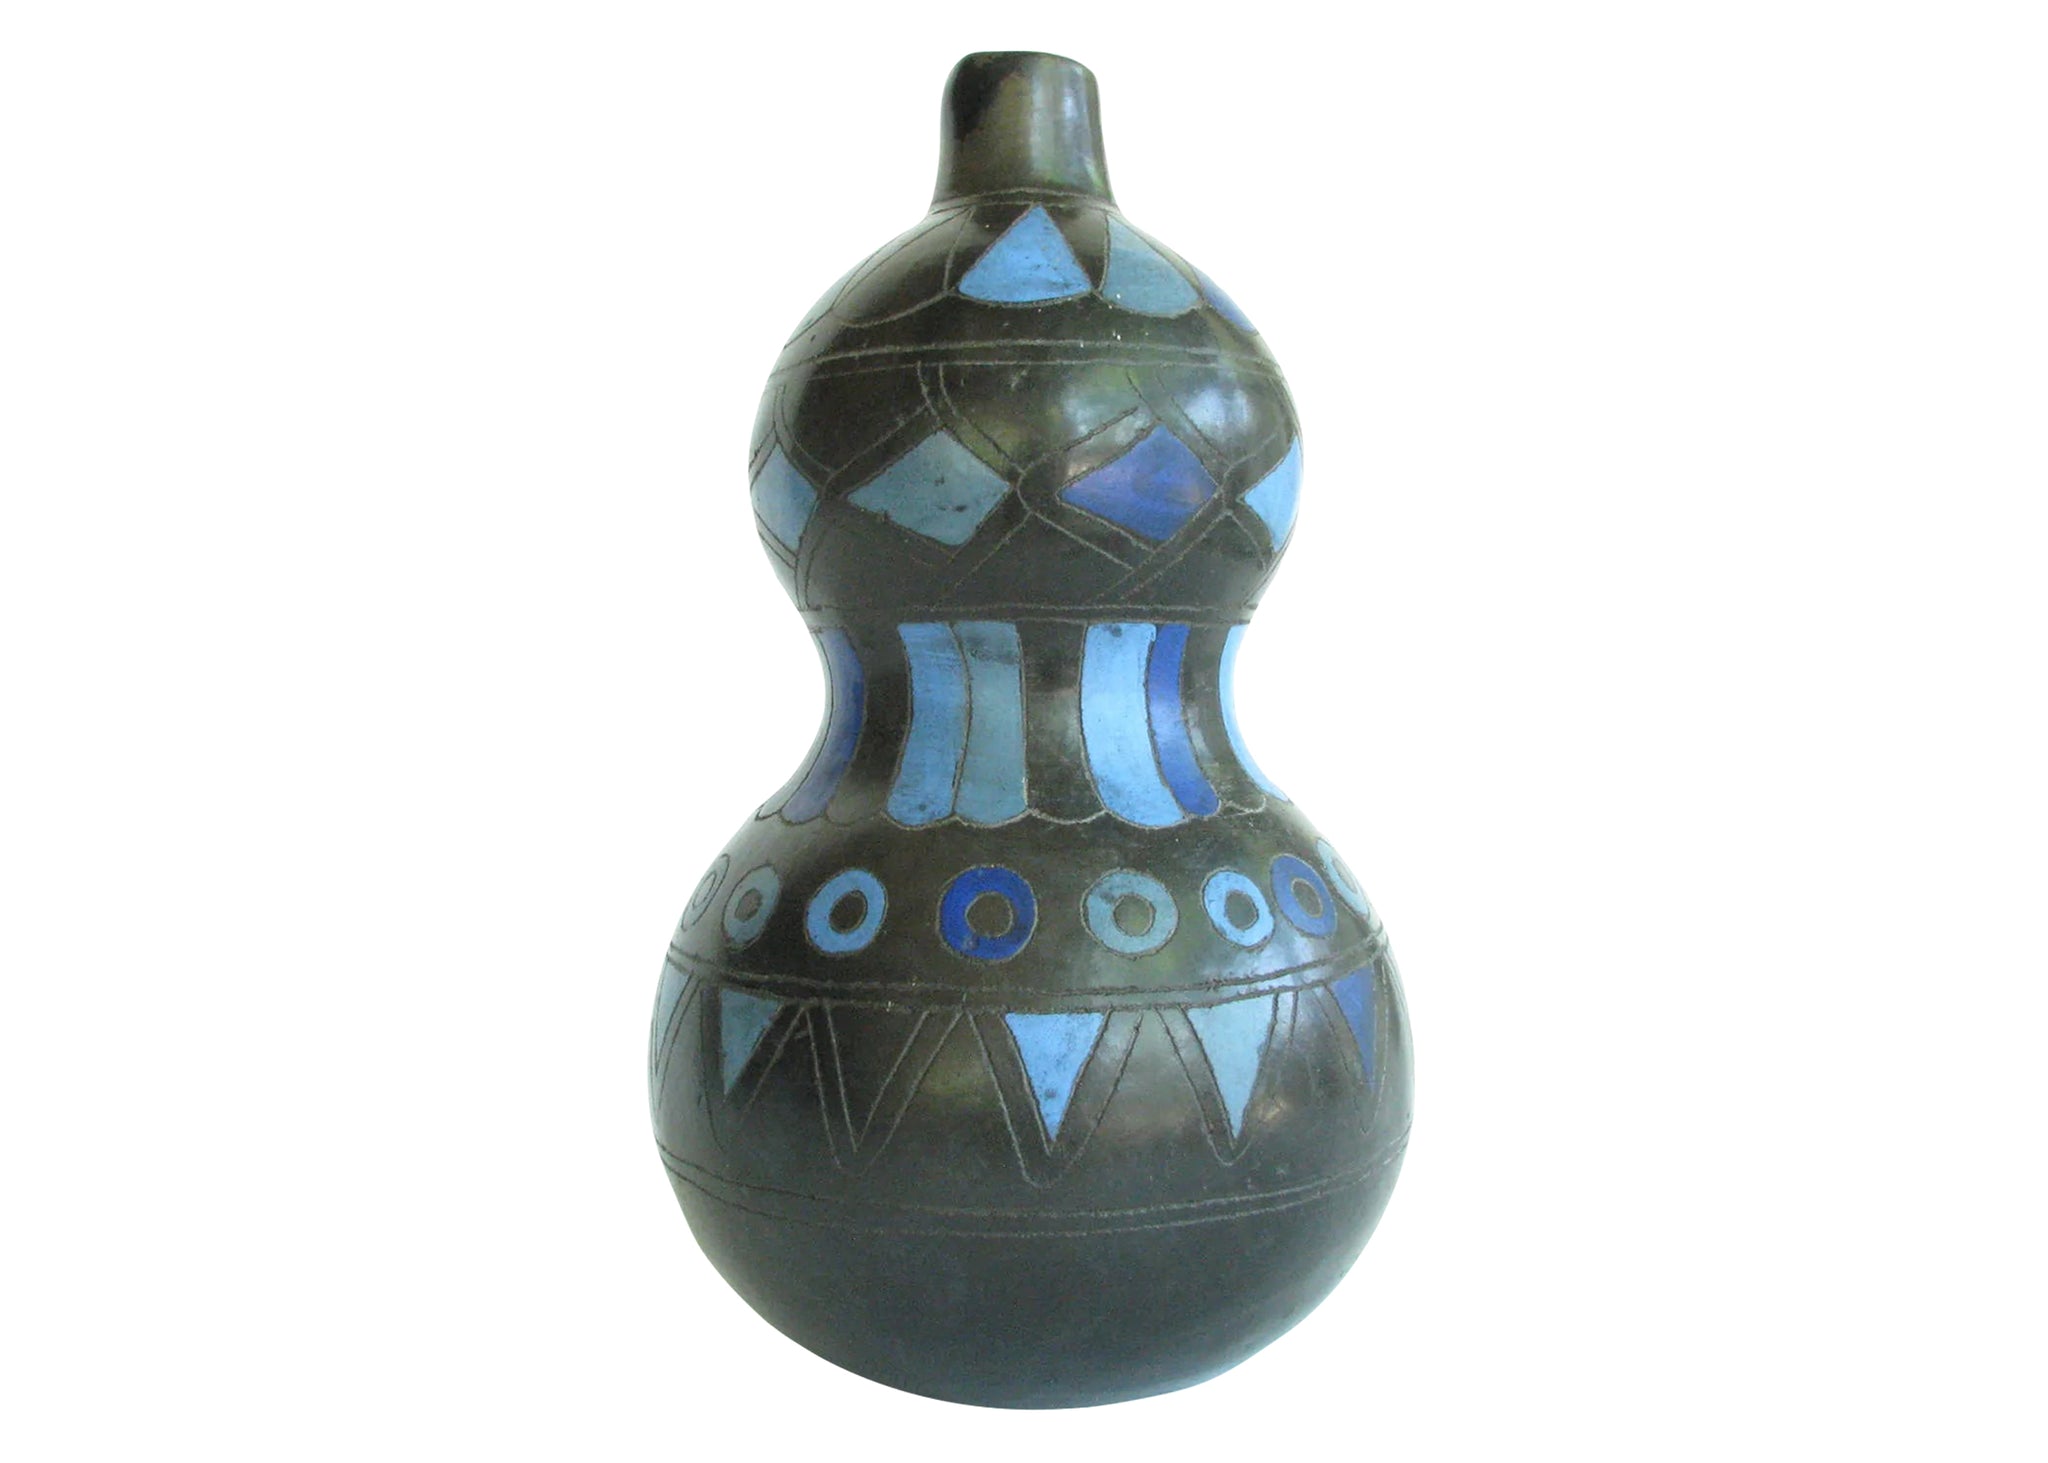 edgebrookhouse - Vintage Mexican Oaxacan black pottery Gourd Vase - Hand decorated in multi shades of blue